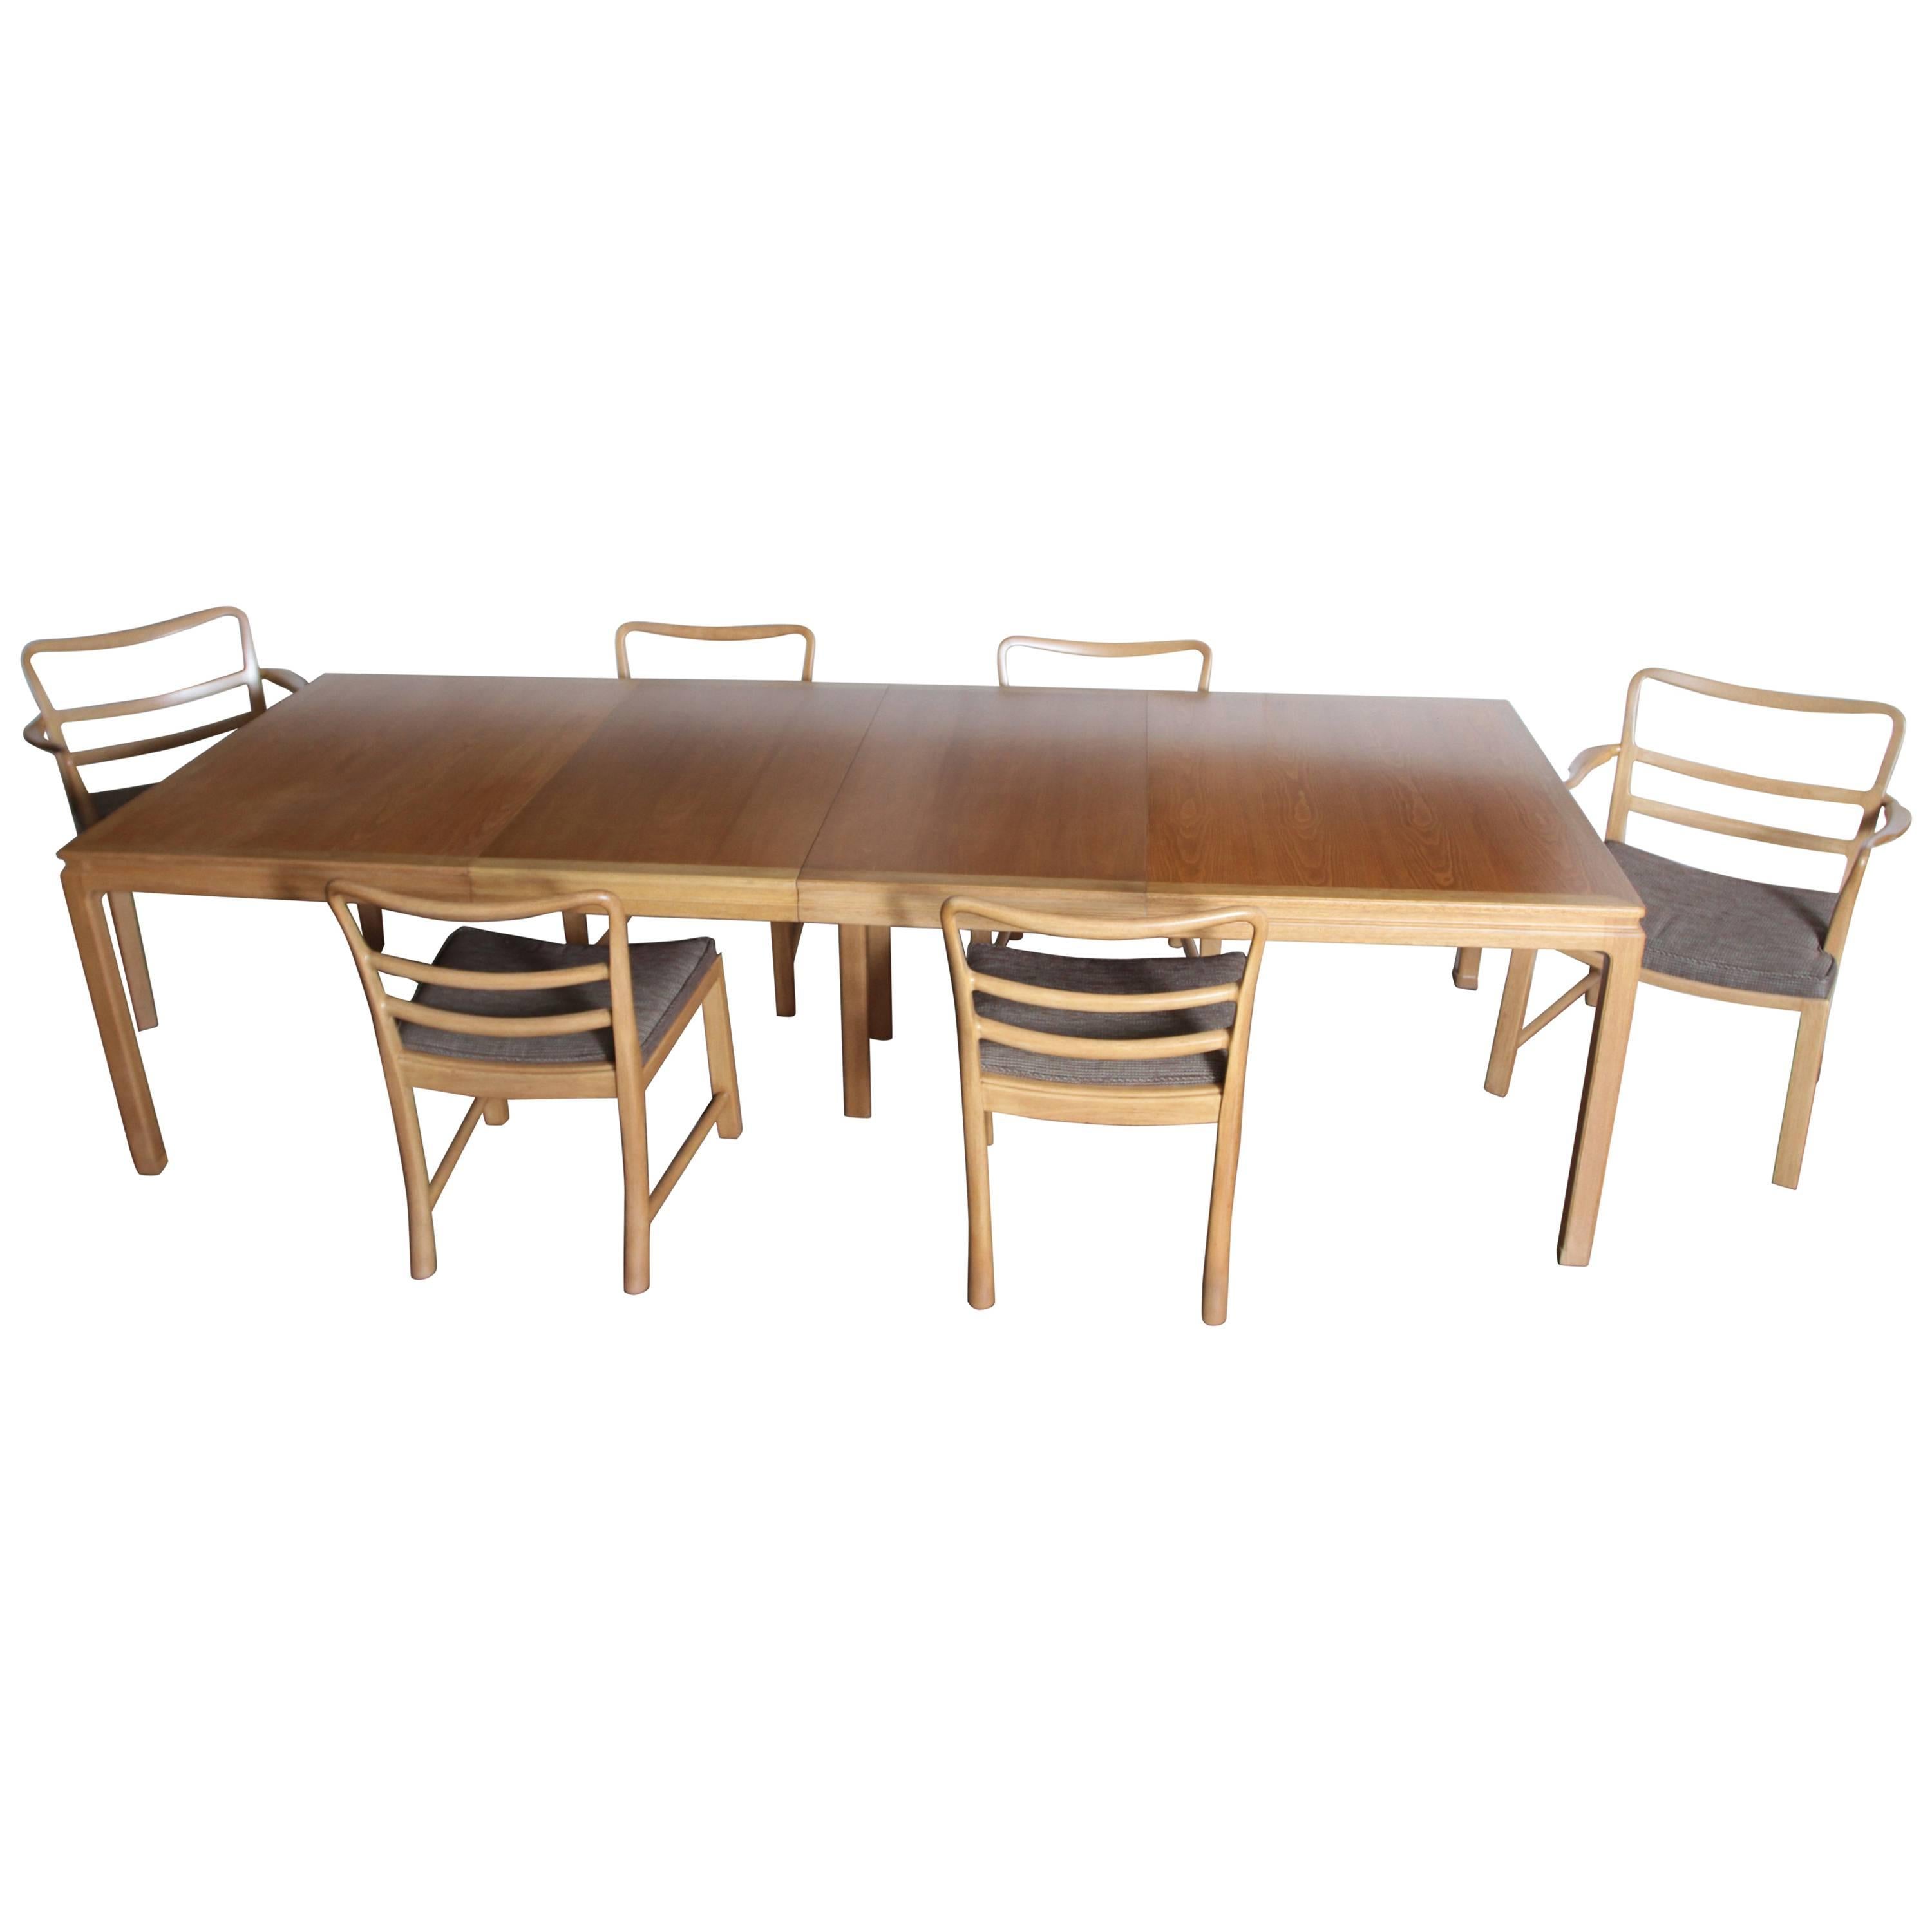 Edward Wormley Dunbar Mahogany Dining Table With Chairs Two Leaves Two Armchairs For Sale